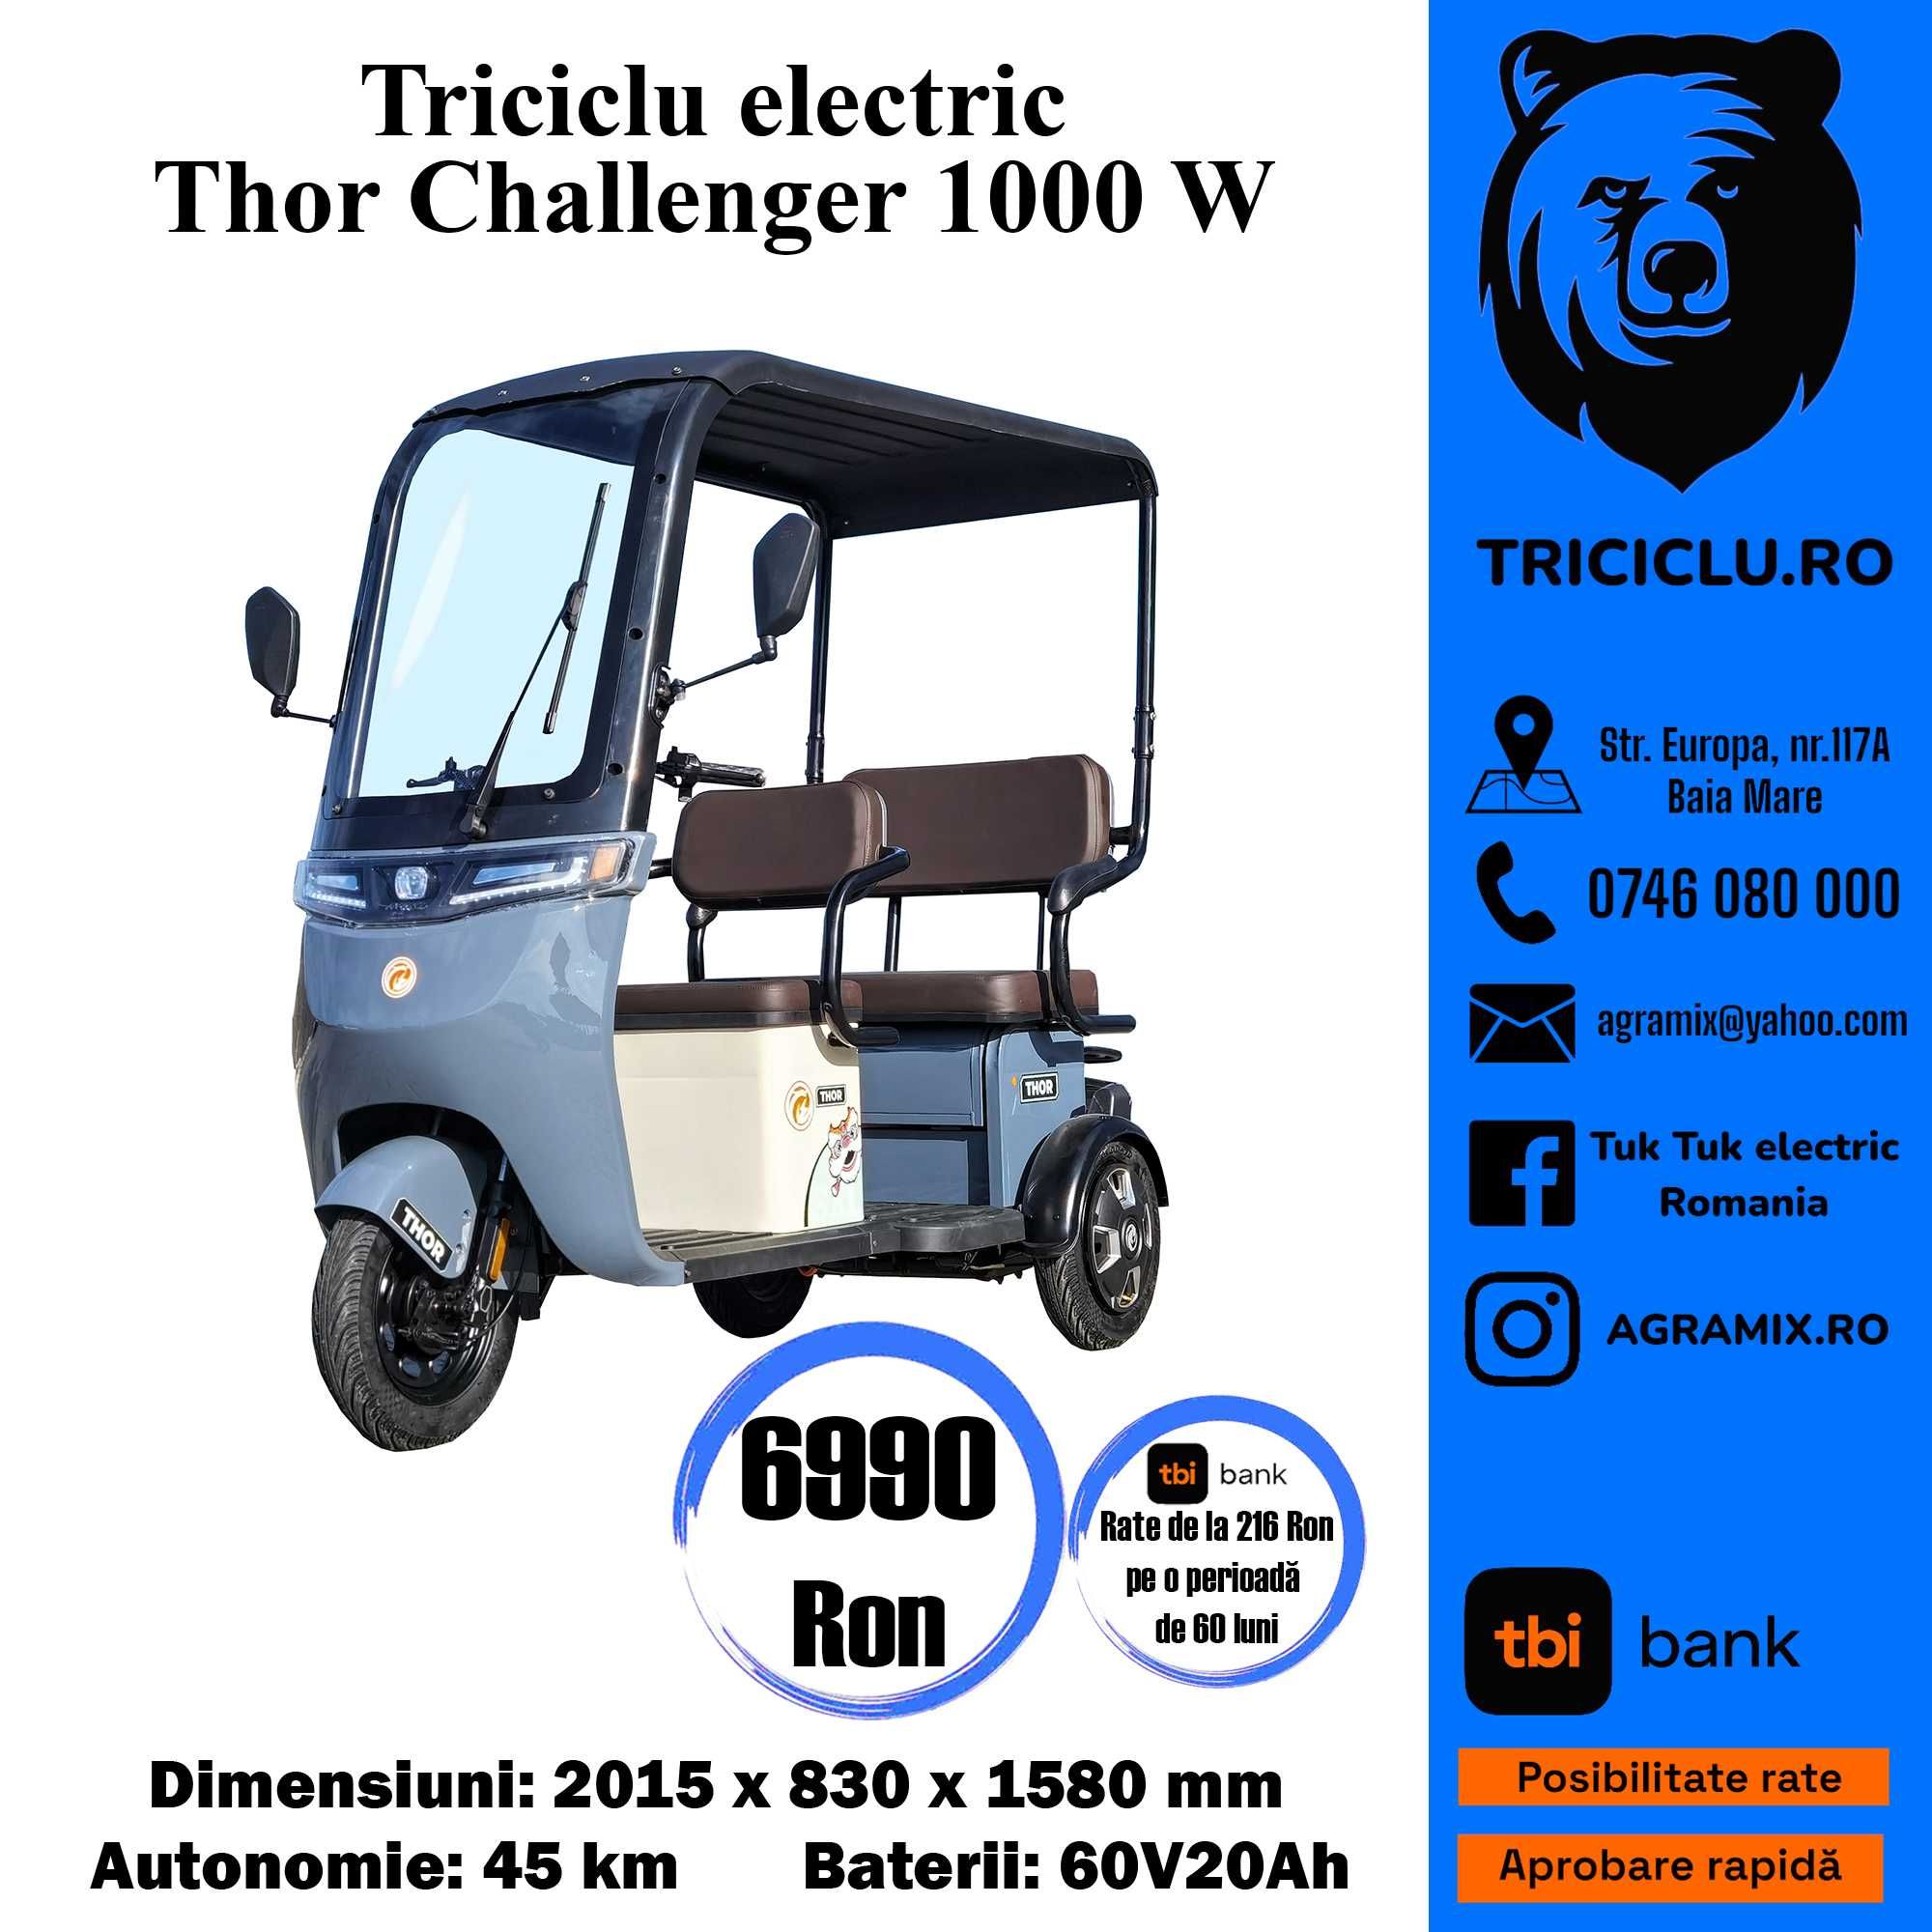 Triciclu electric Thor Challenger motor 1000 W Agramix